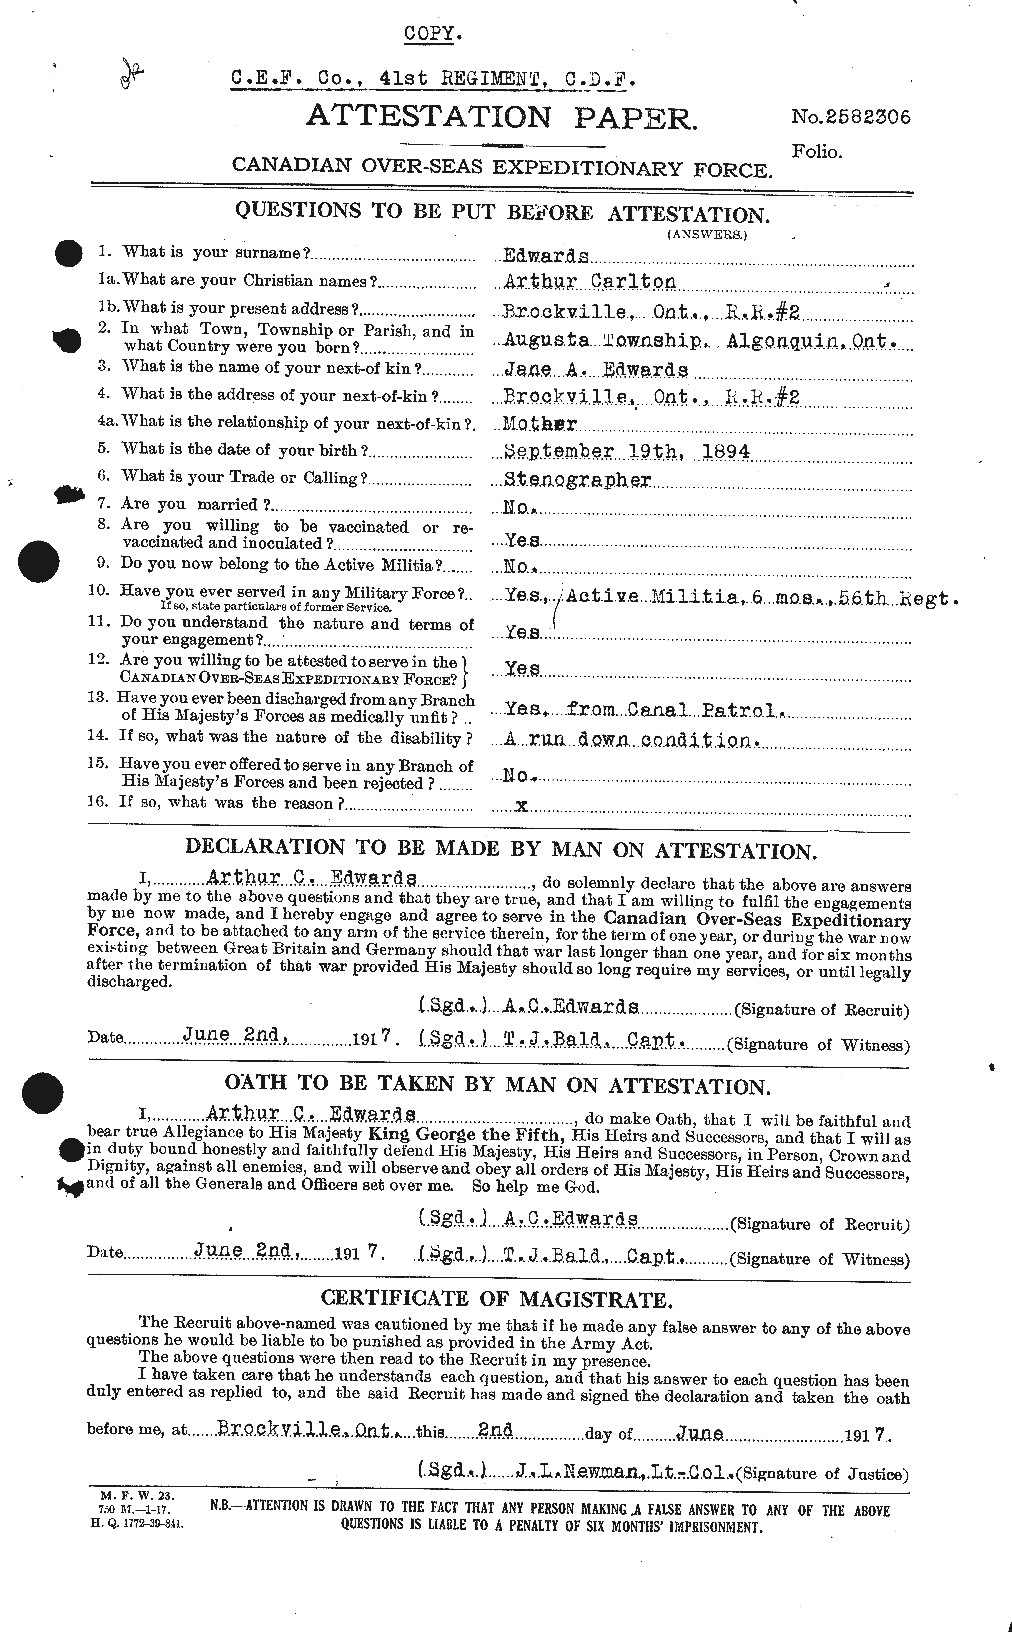 Personnel Records of the First World War - CEF 313133a